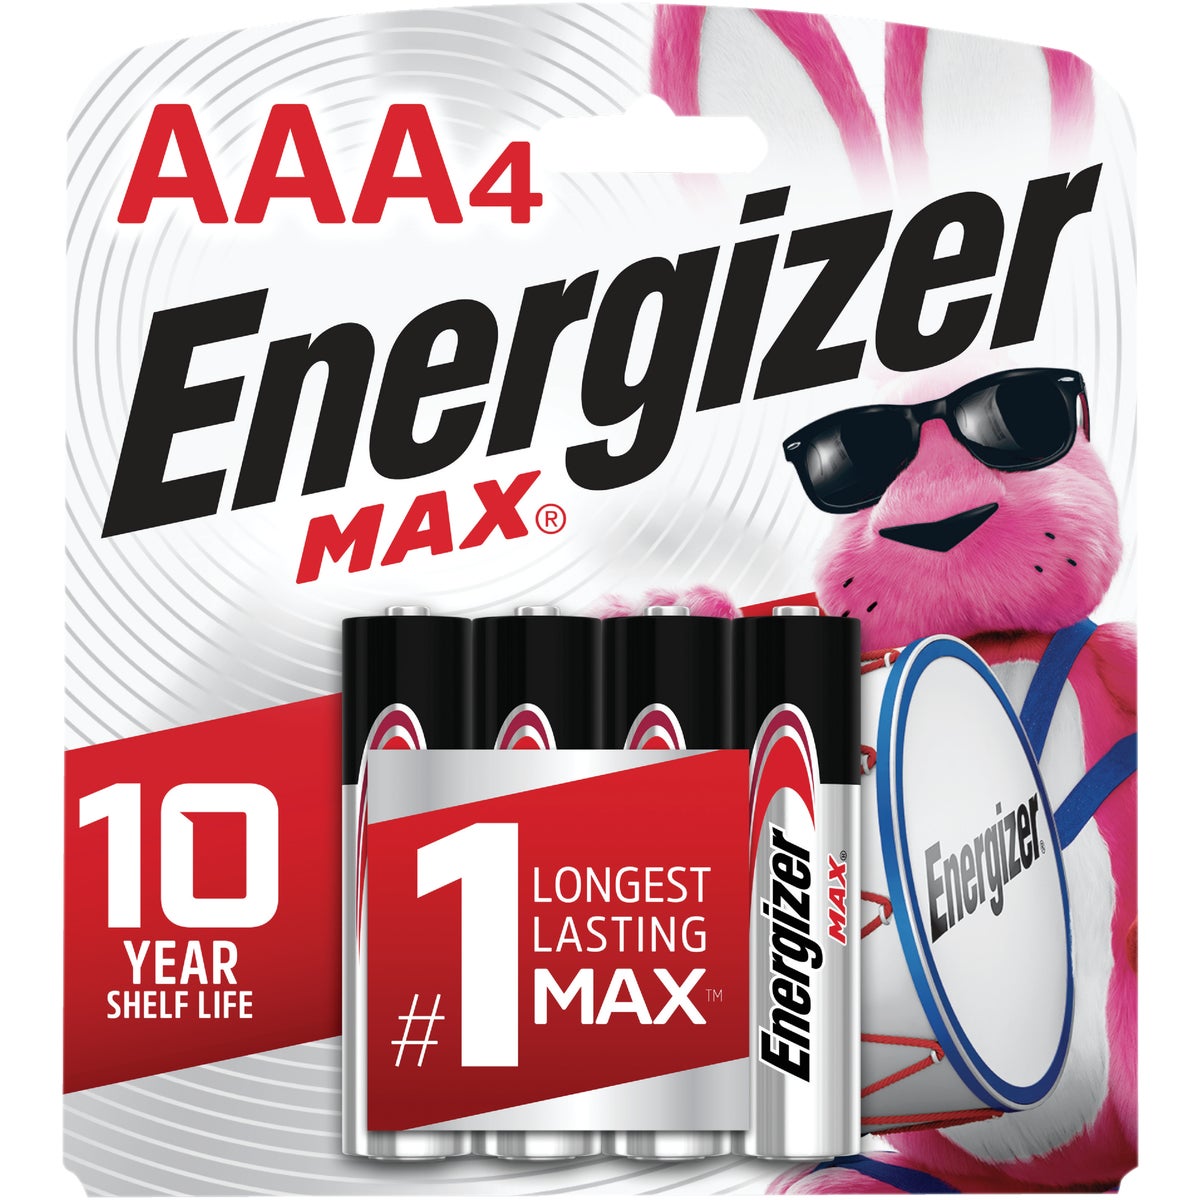 Energizer Max AAA Alkaline Battery (4-Pack)